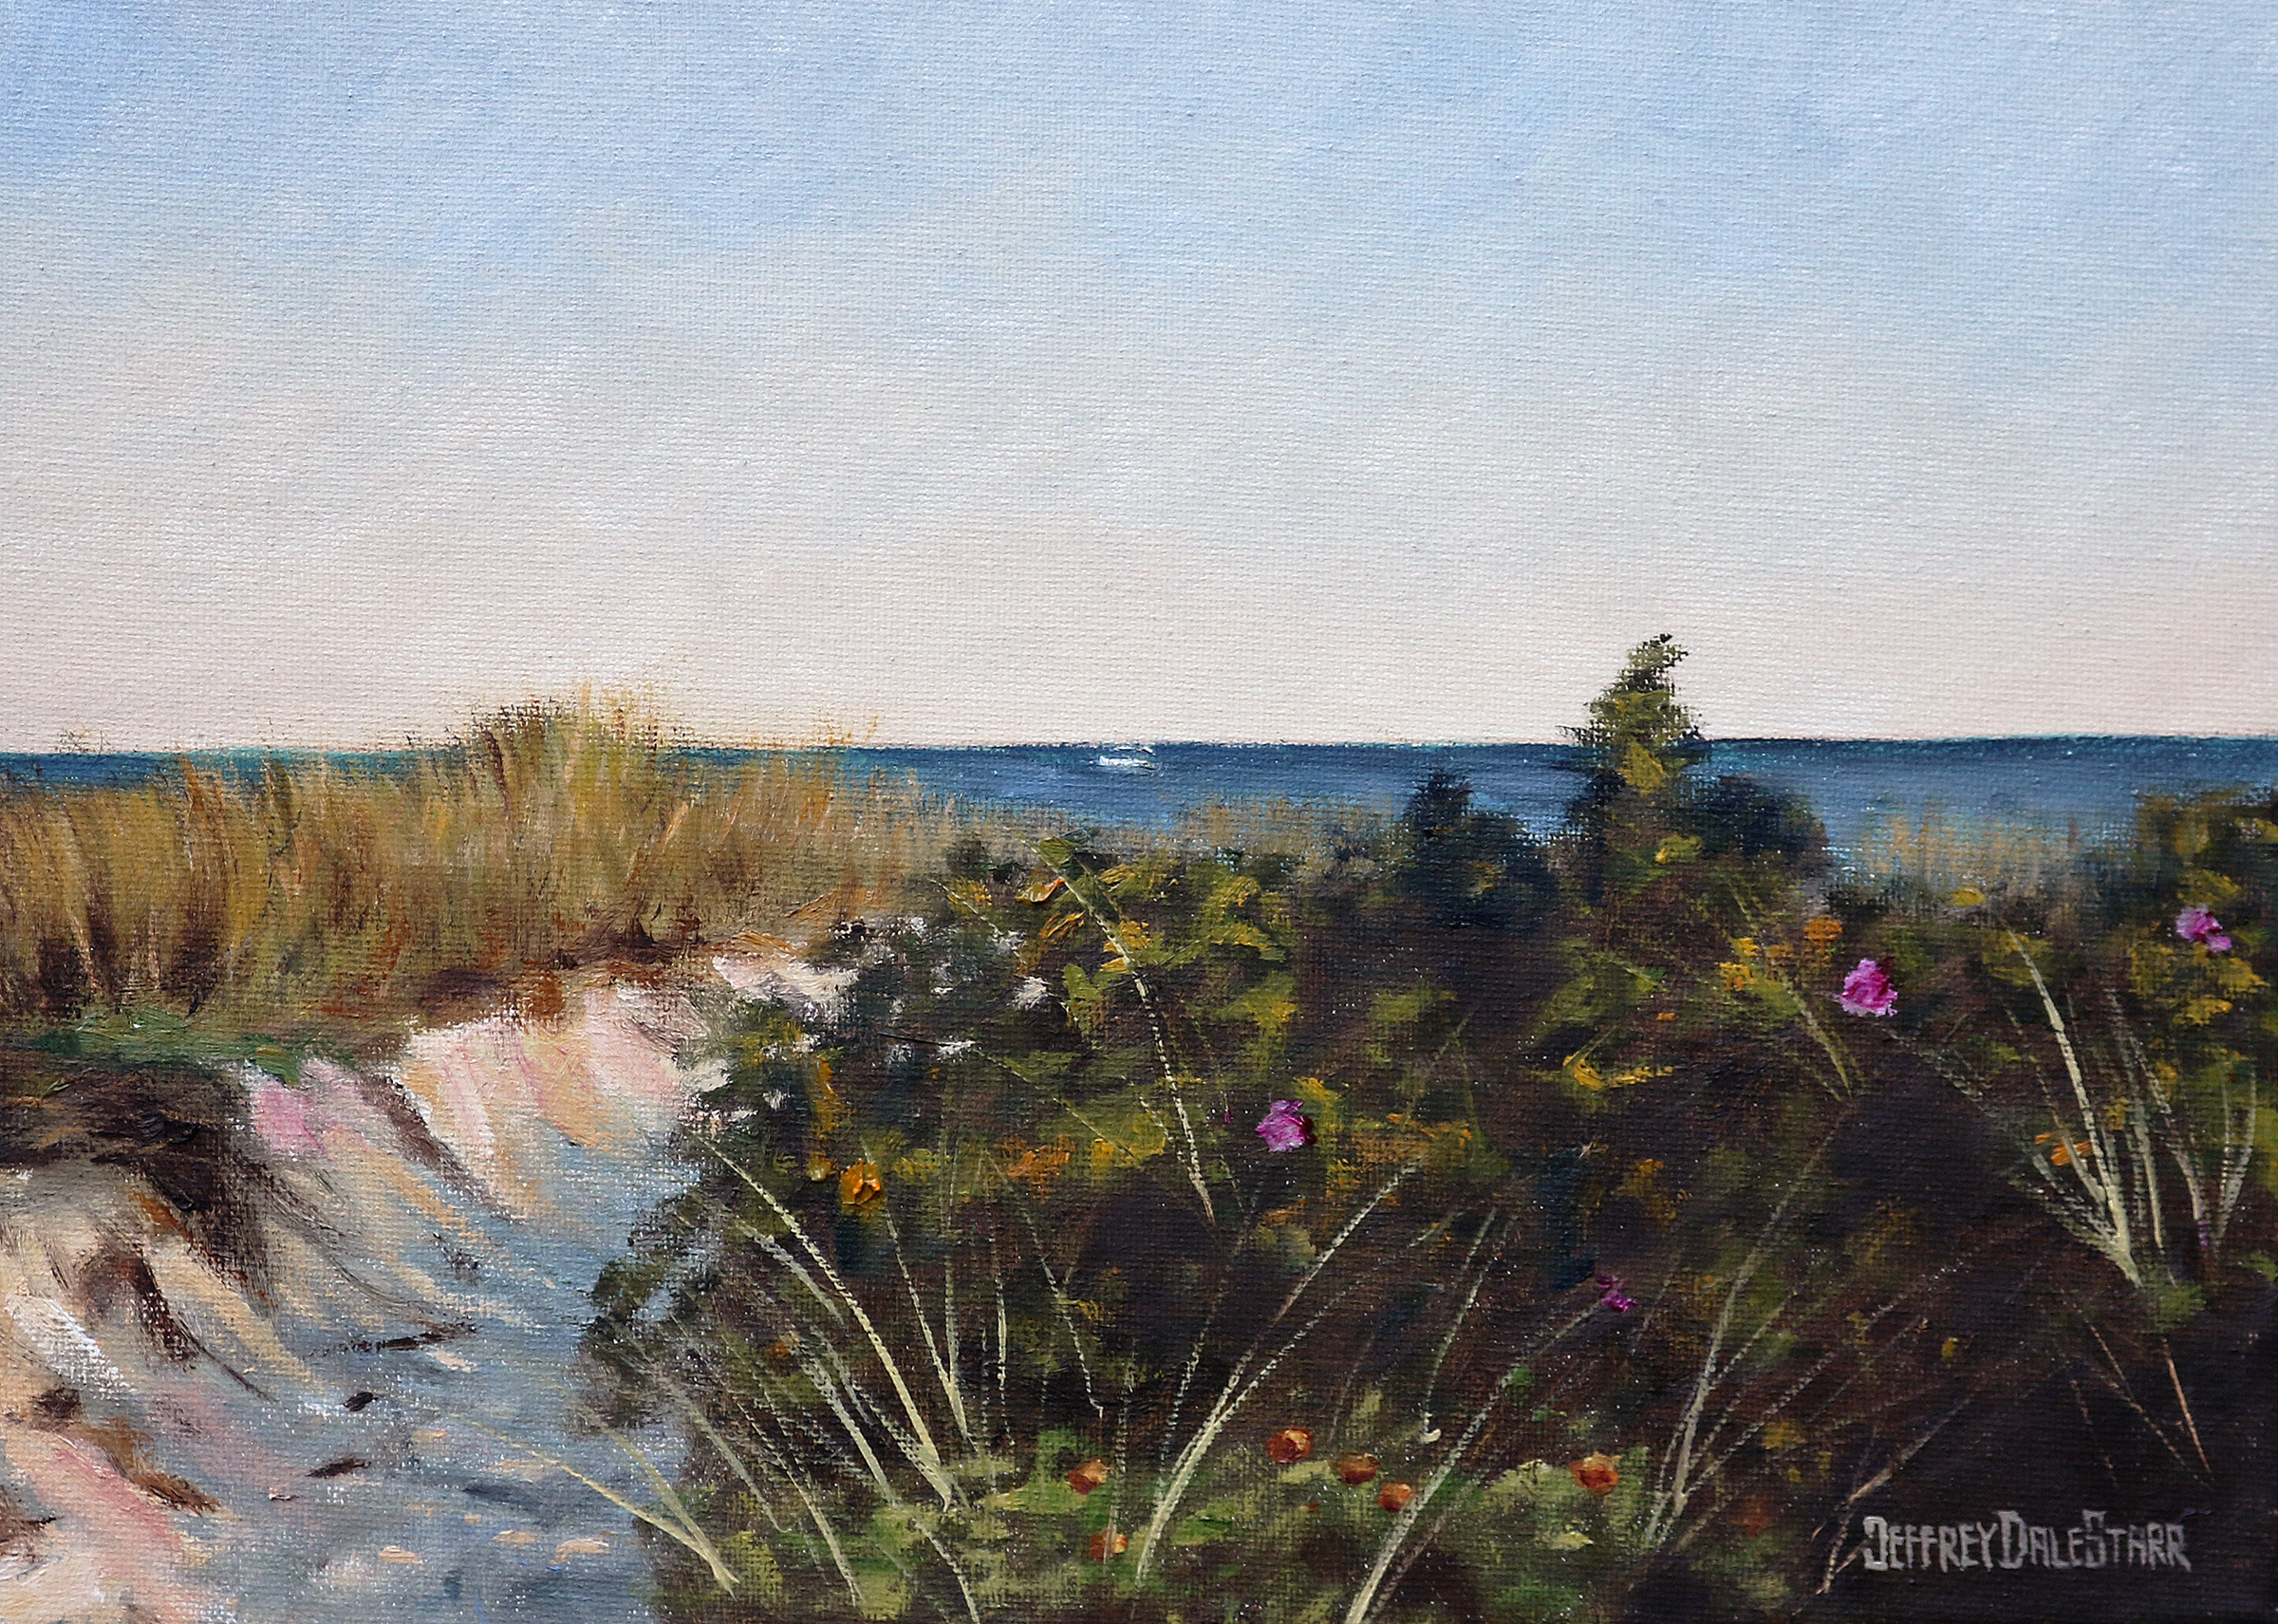 Oil painting "Entering Dowses Beach" by Jeffrey Dale Starr